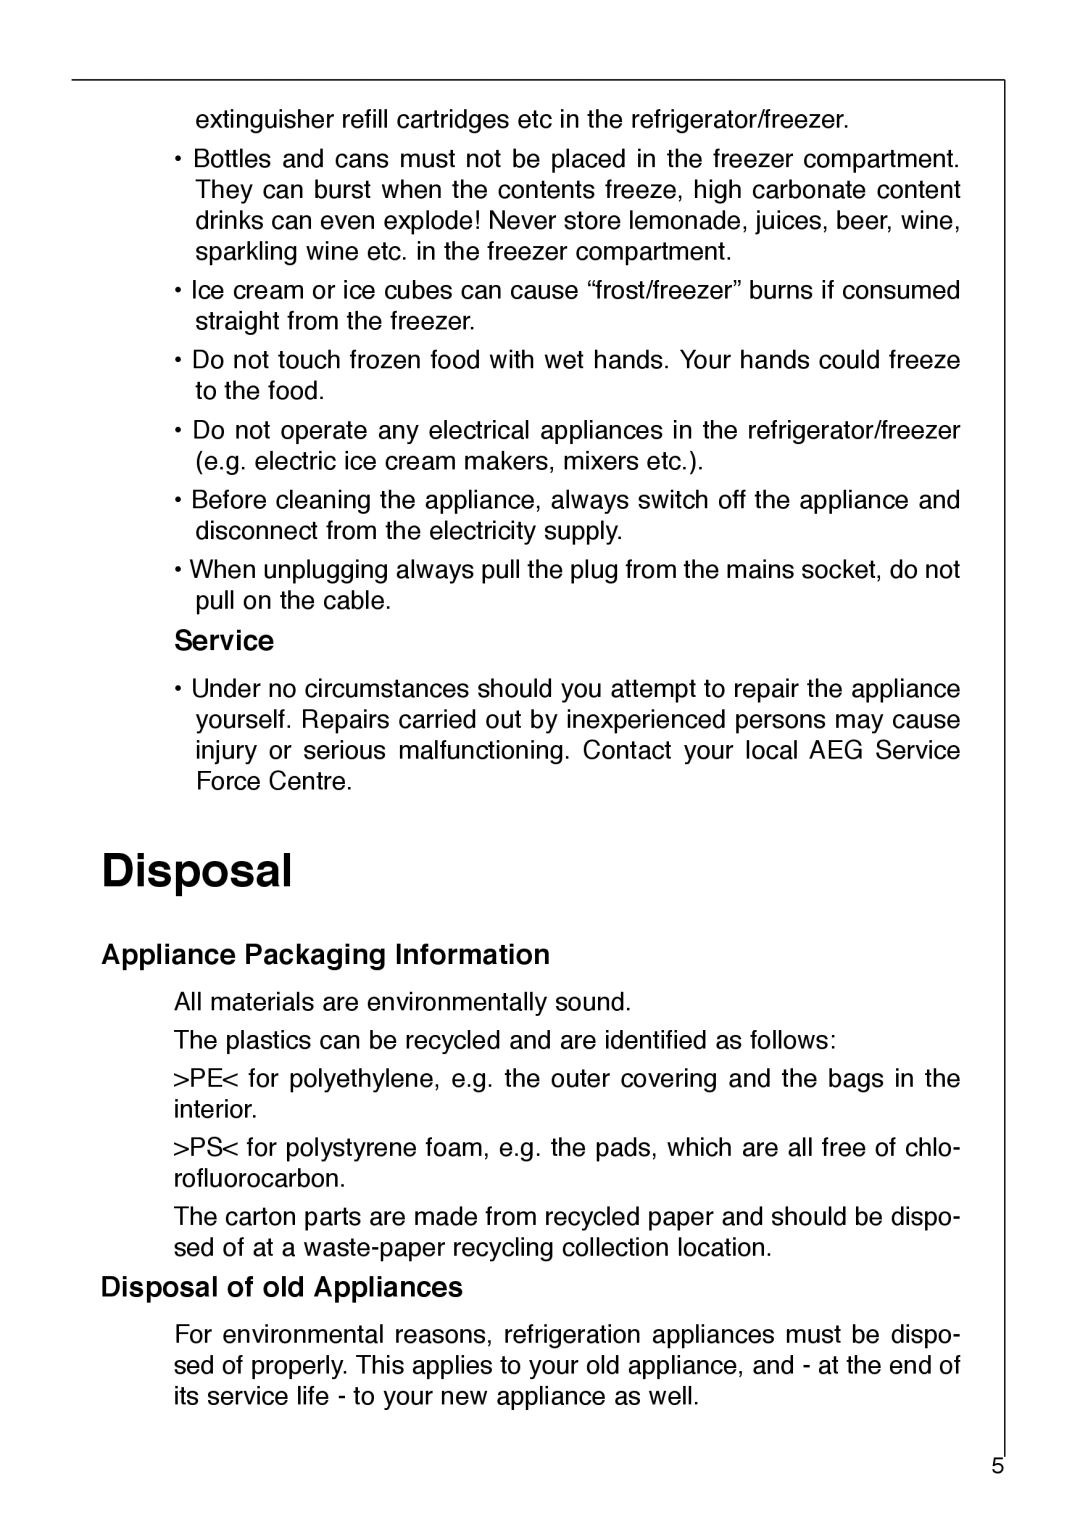 Electrolux SANTO 2842-6 i Service, Appliance Packaging Information, Disposal of old Appliances 